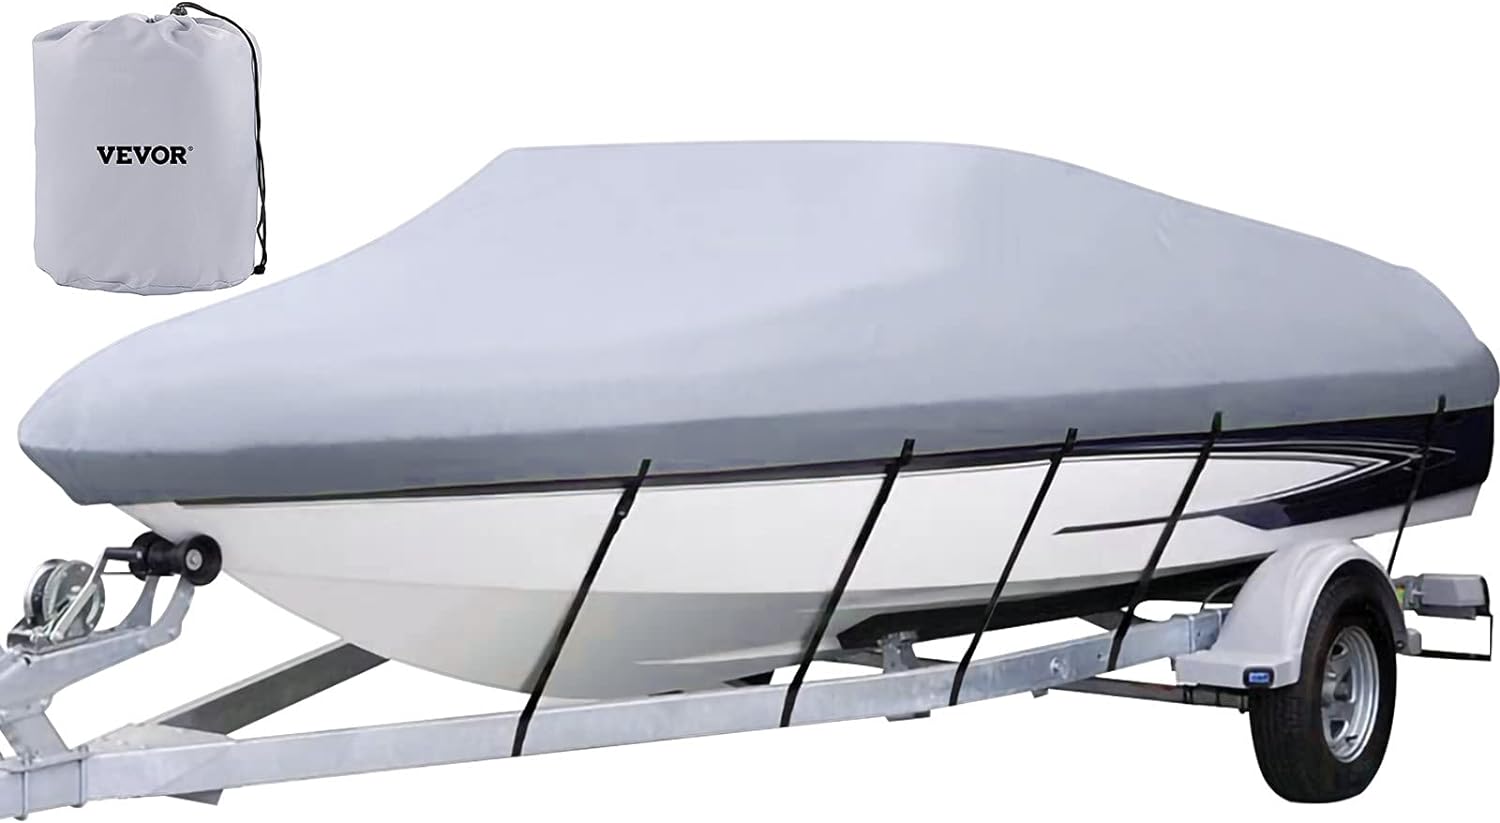 Weatherproof boat covers for in-garage protection